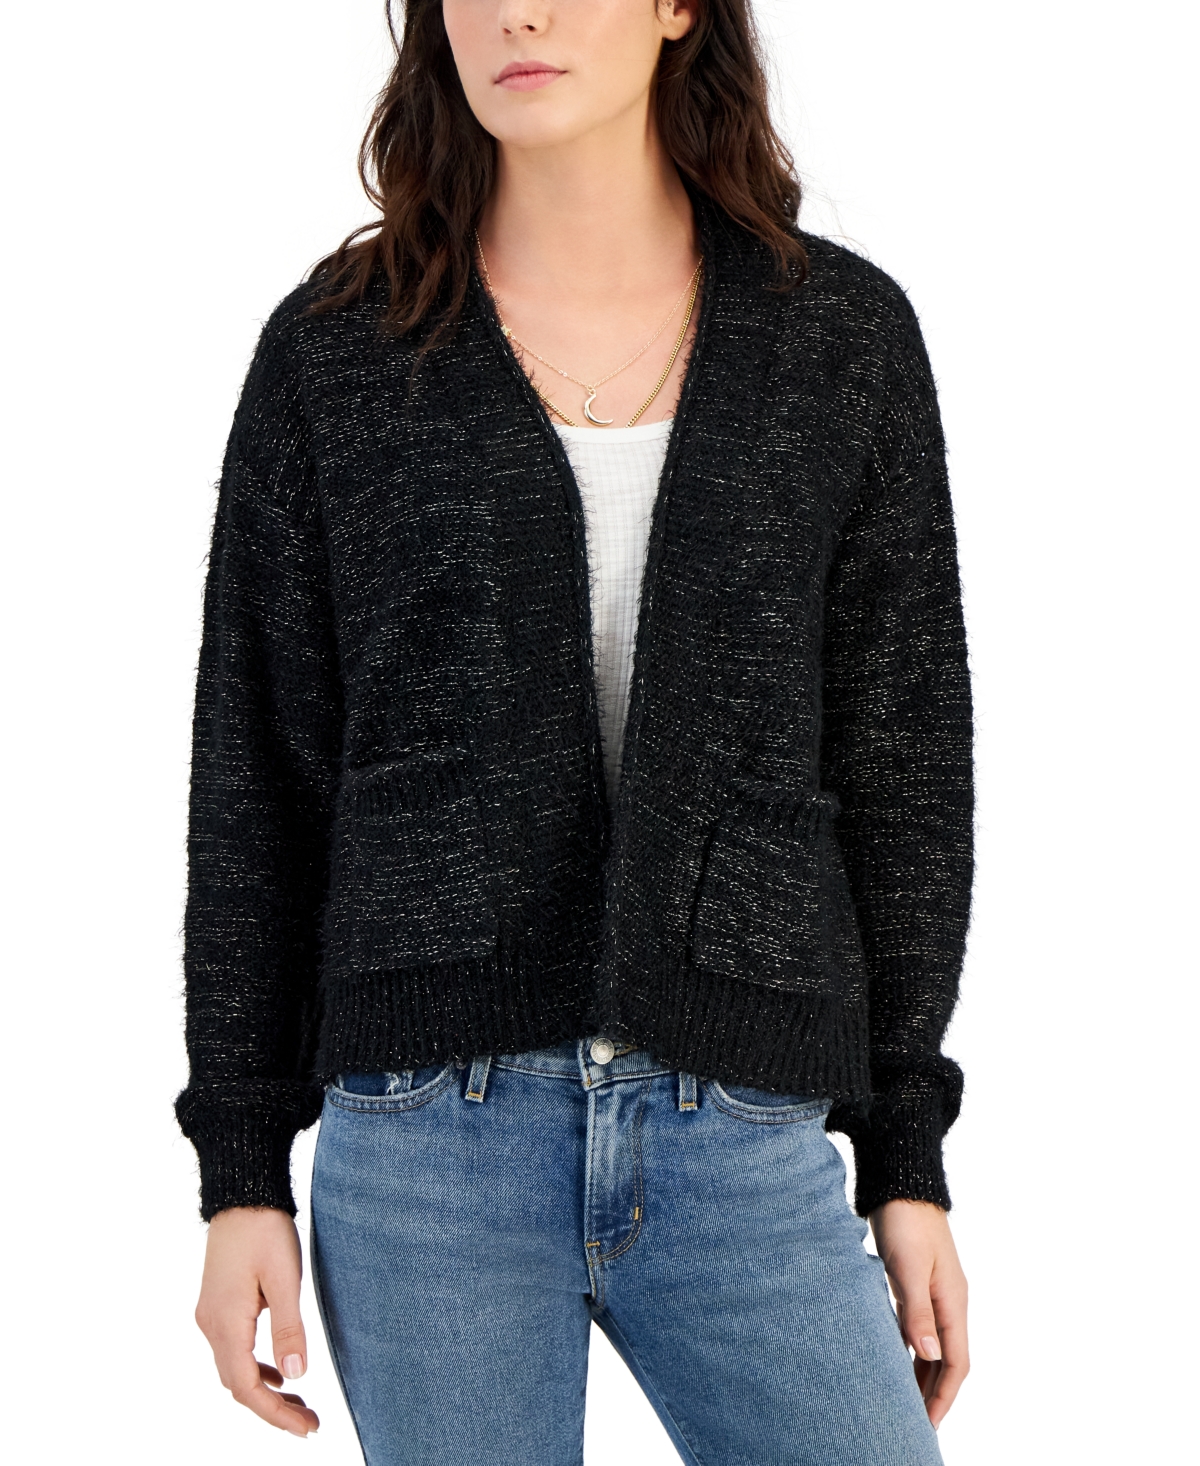 Hooked Up By Iot Juniors' Open-front Lurex Eyelash-knit Cardigan In Black